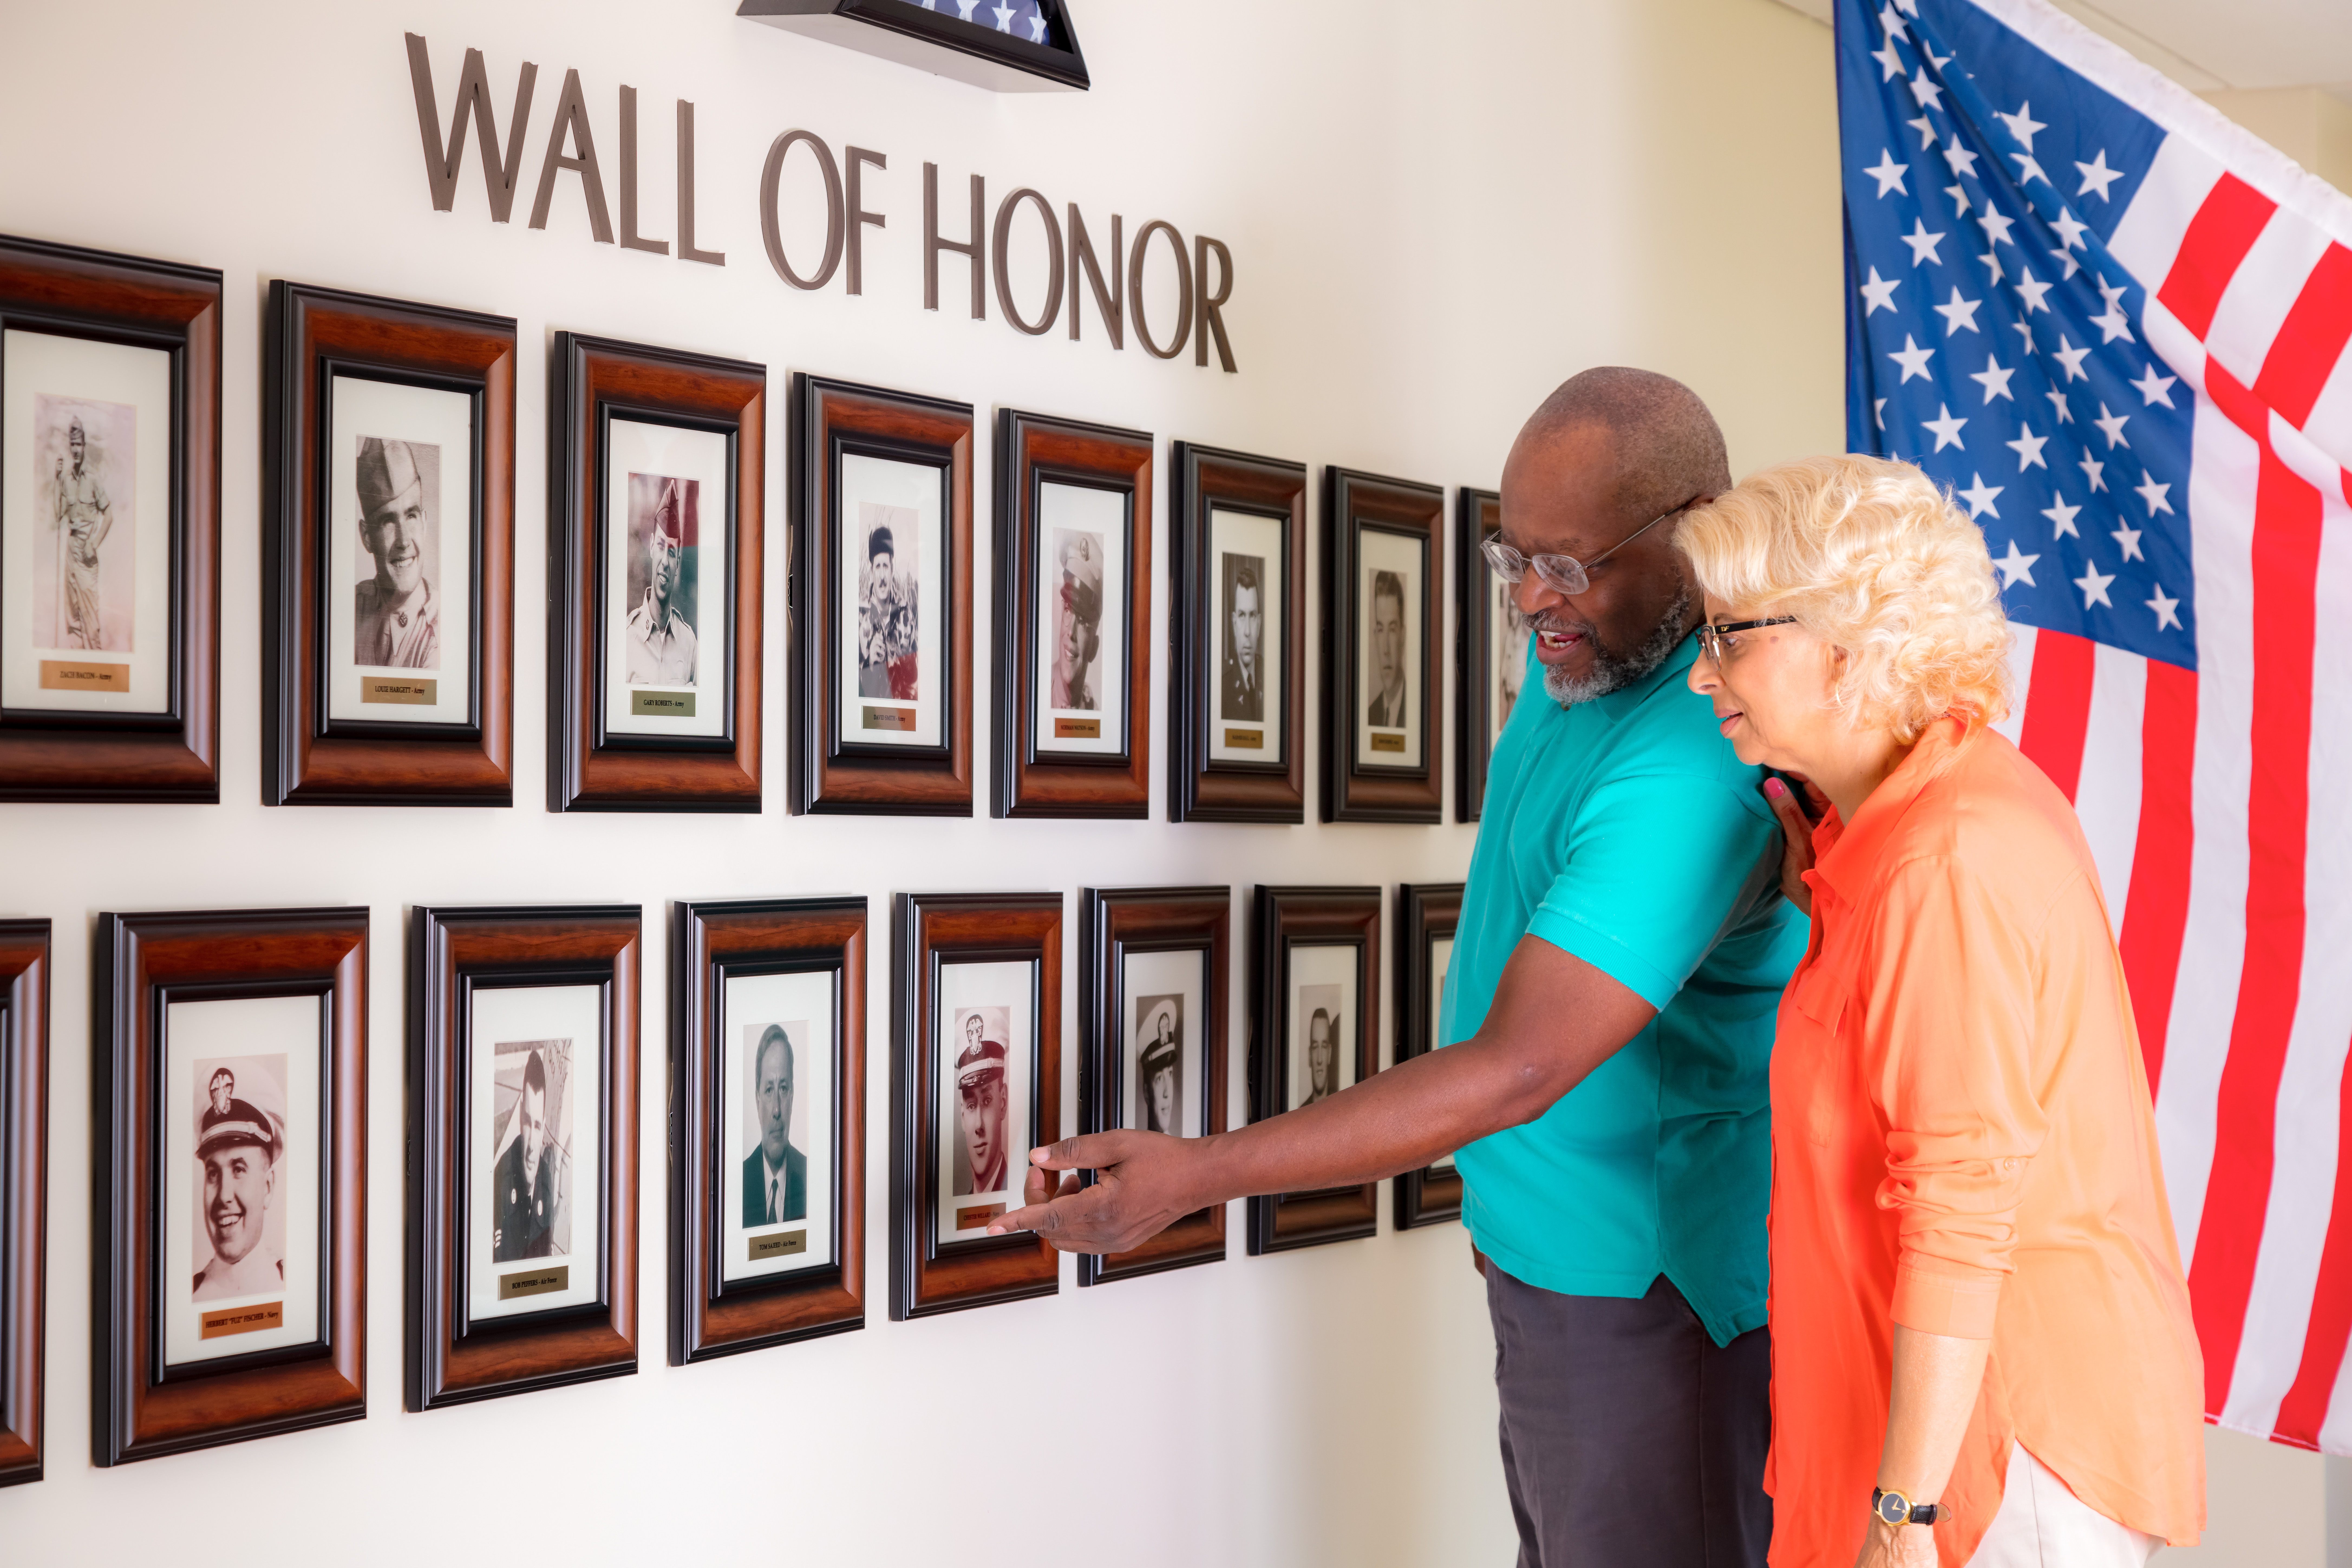 Cardinal residents talking and pointing to pictures on the community's Wall of Honor featuring photos of veterans who live at the community.